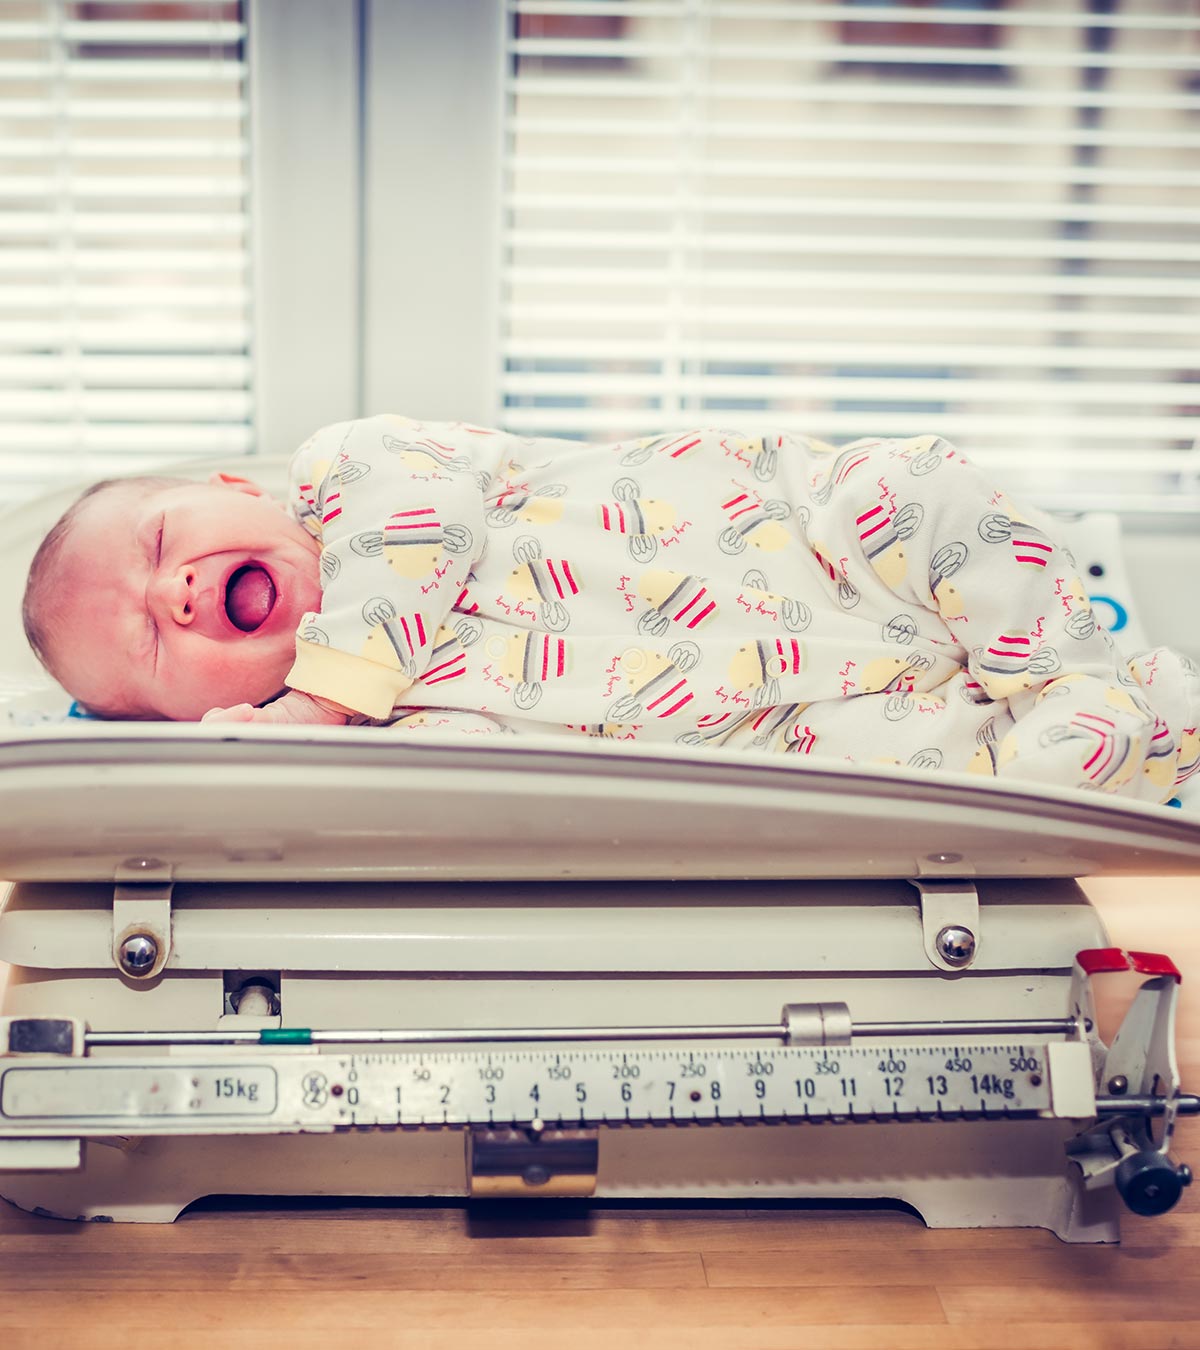 12 Causes Of Low Birth Weight In Babies: Effects & Treatment